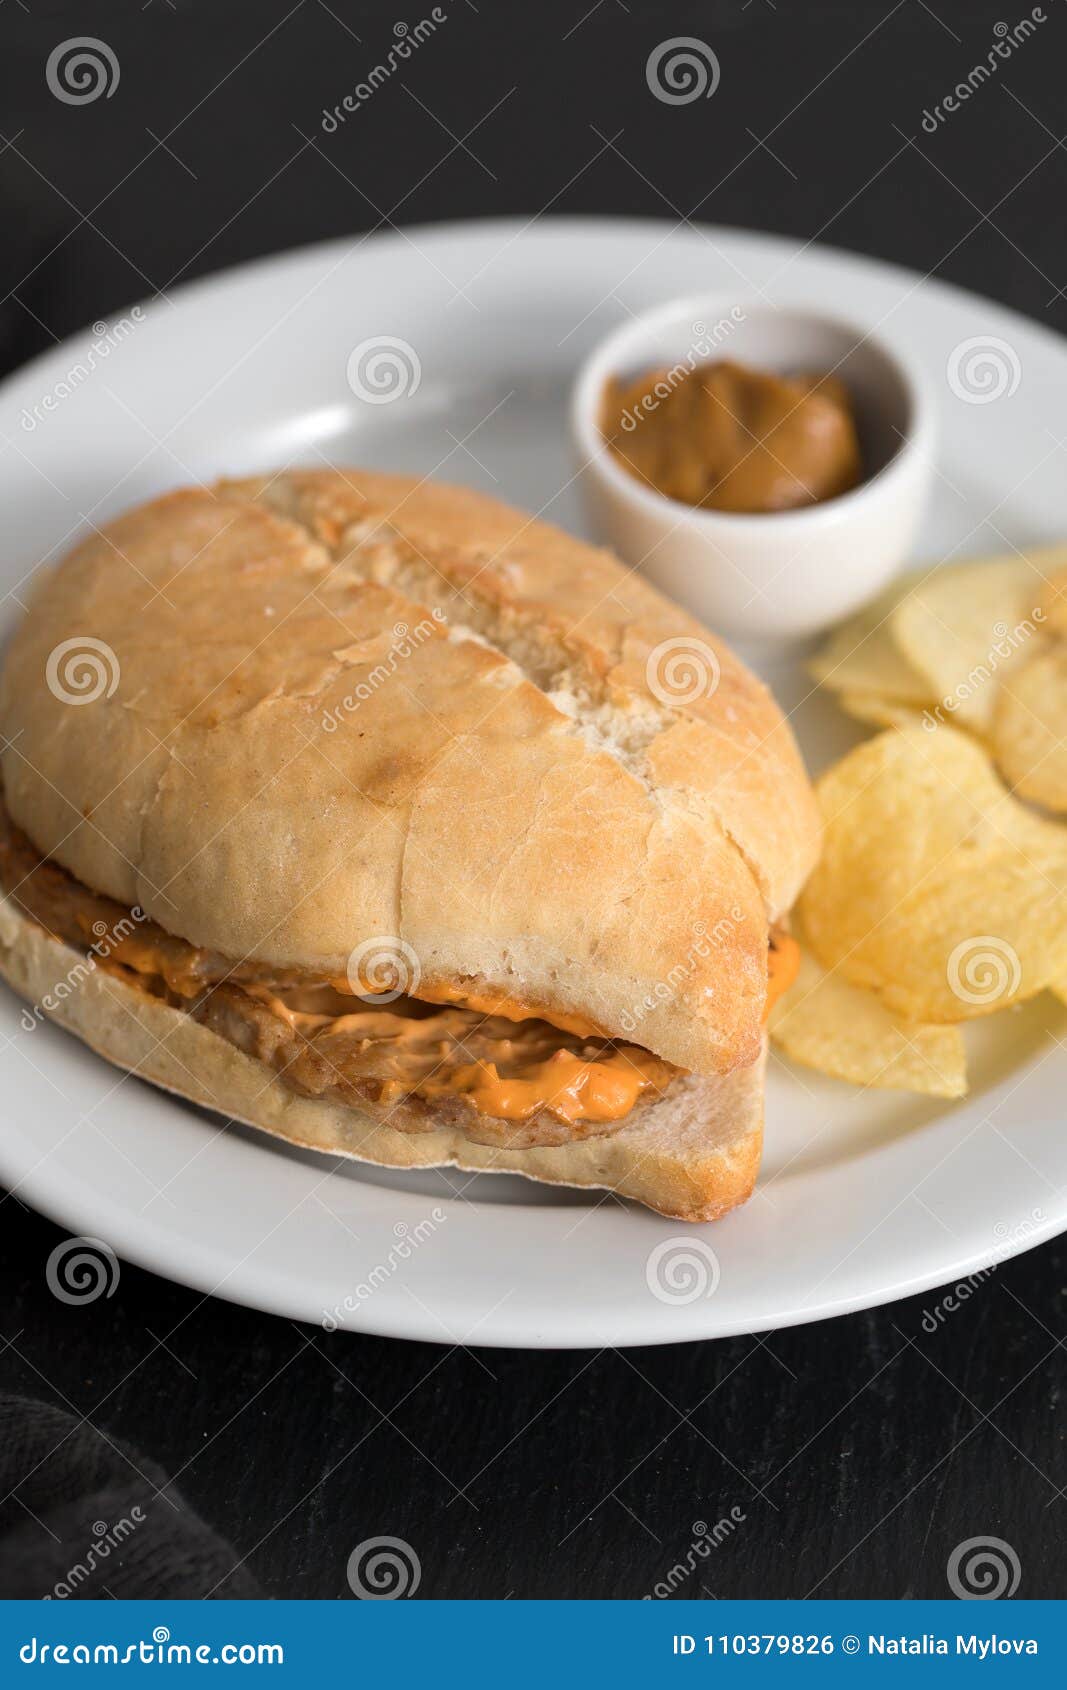 sandwich with meat and potato on plate